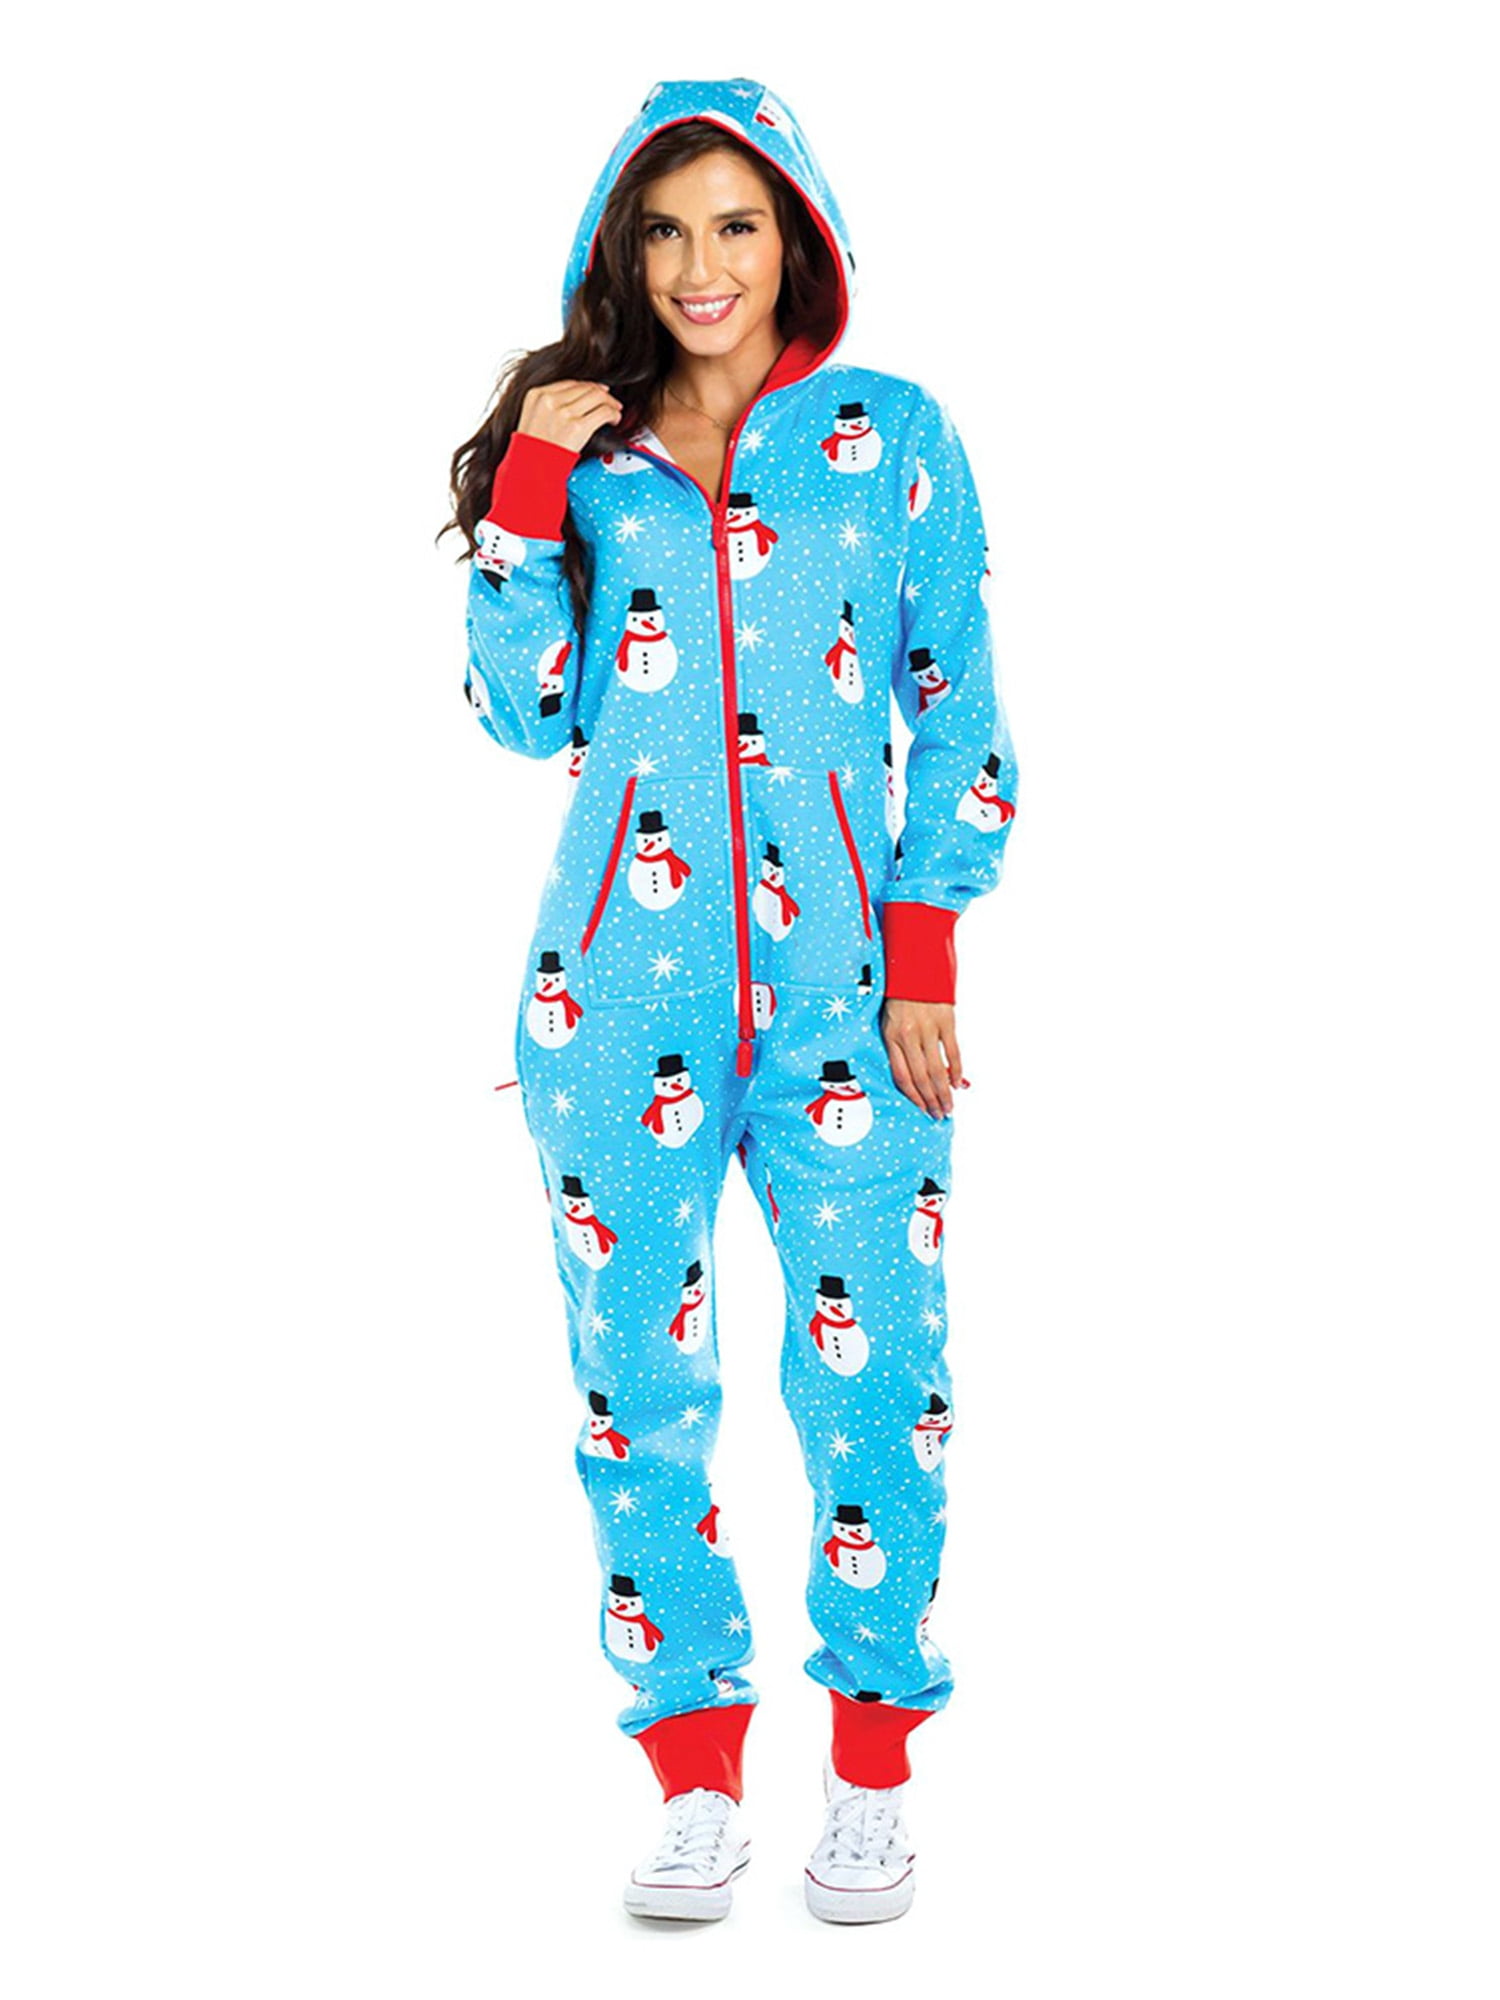 Huyghdfb Women's Onesies Hooded Pajamas Warm Christmas Pajamas for Adult Stanza Snowman Jumpsuit Xmas Overalls